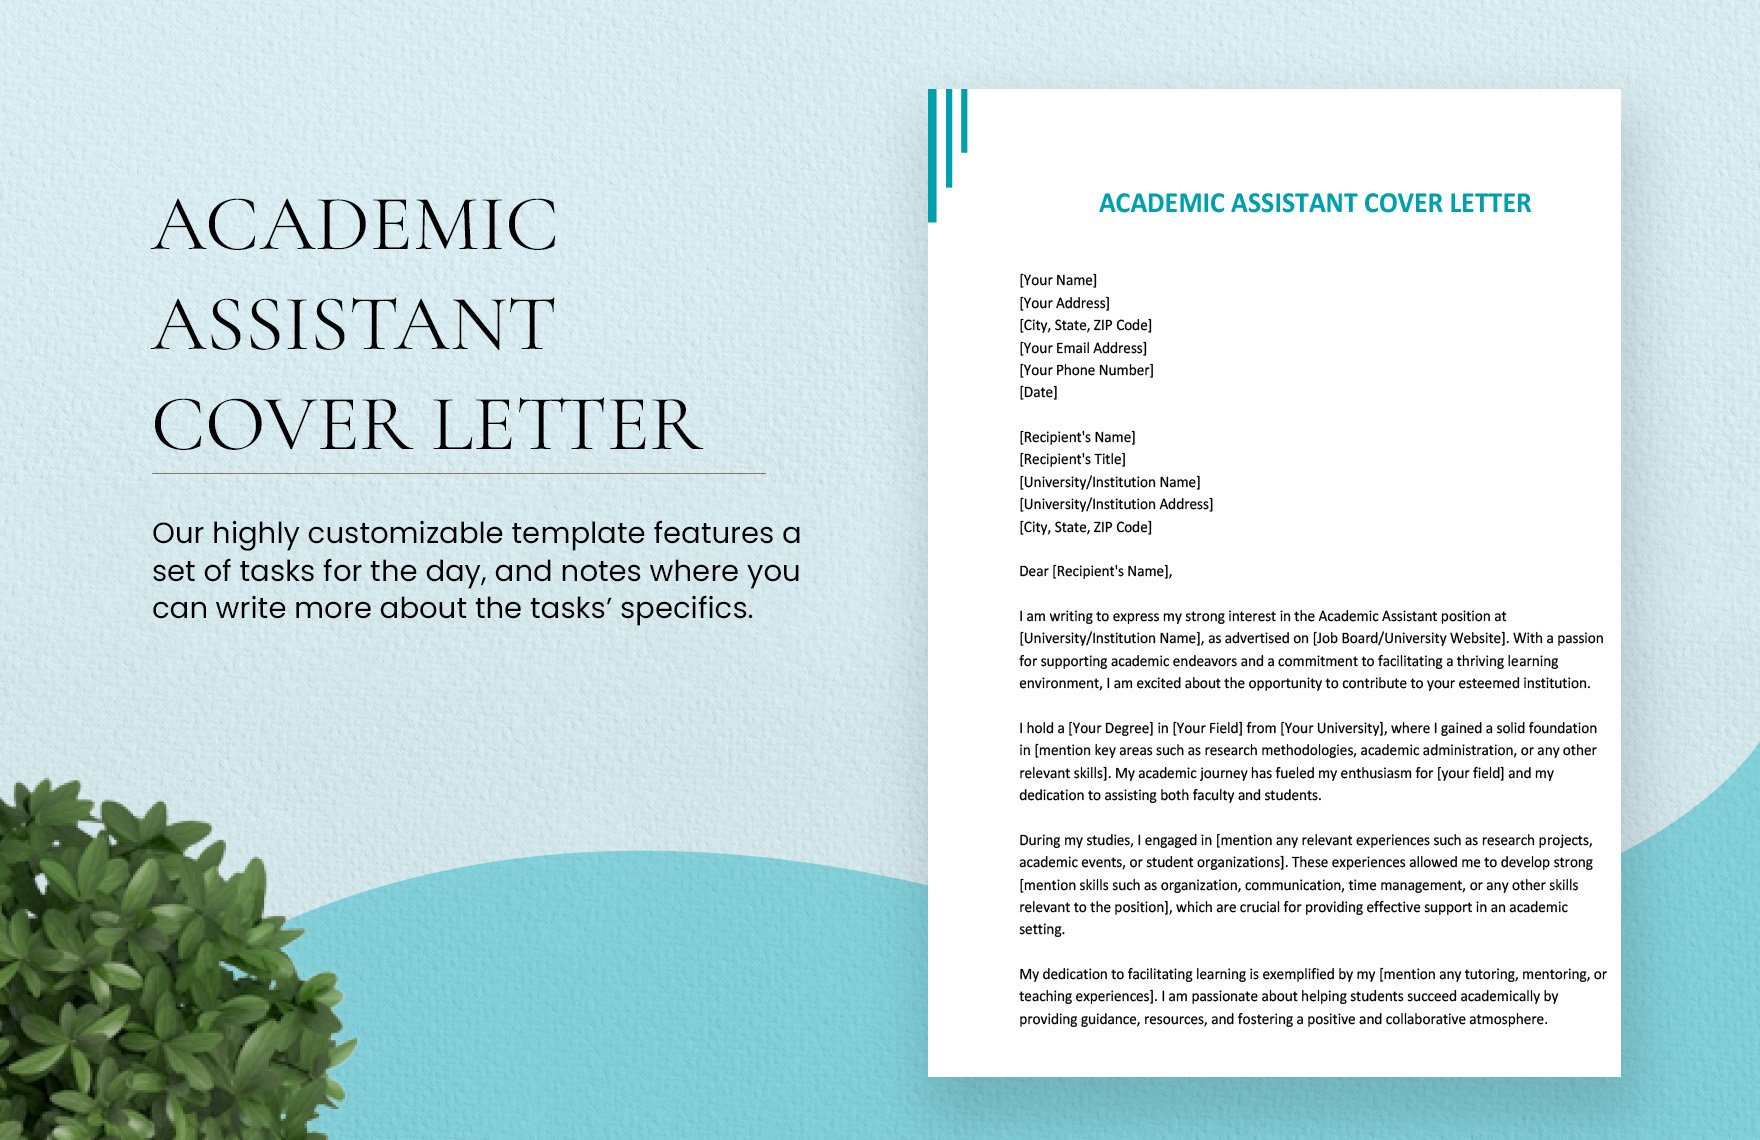 Academic Assistant Cover Letter